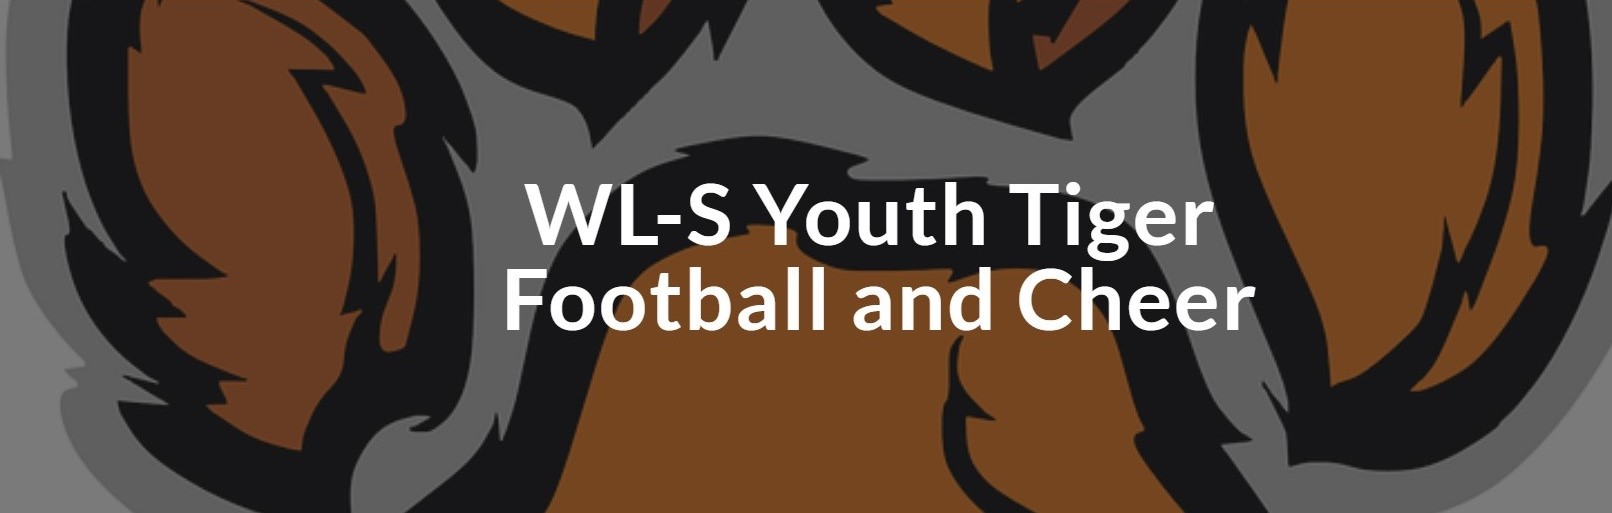 WL-S Youth Football and Cheer